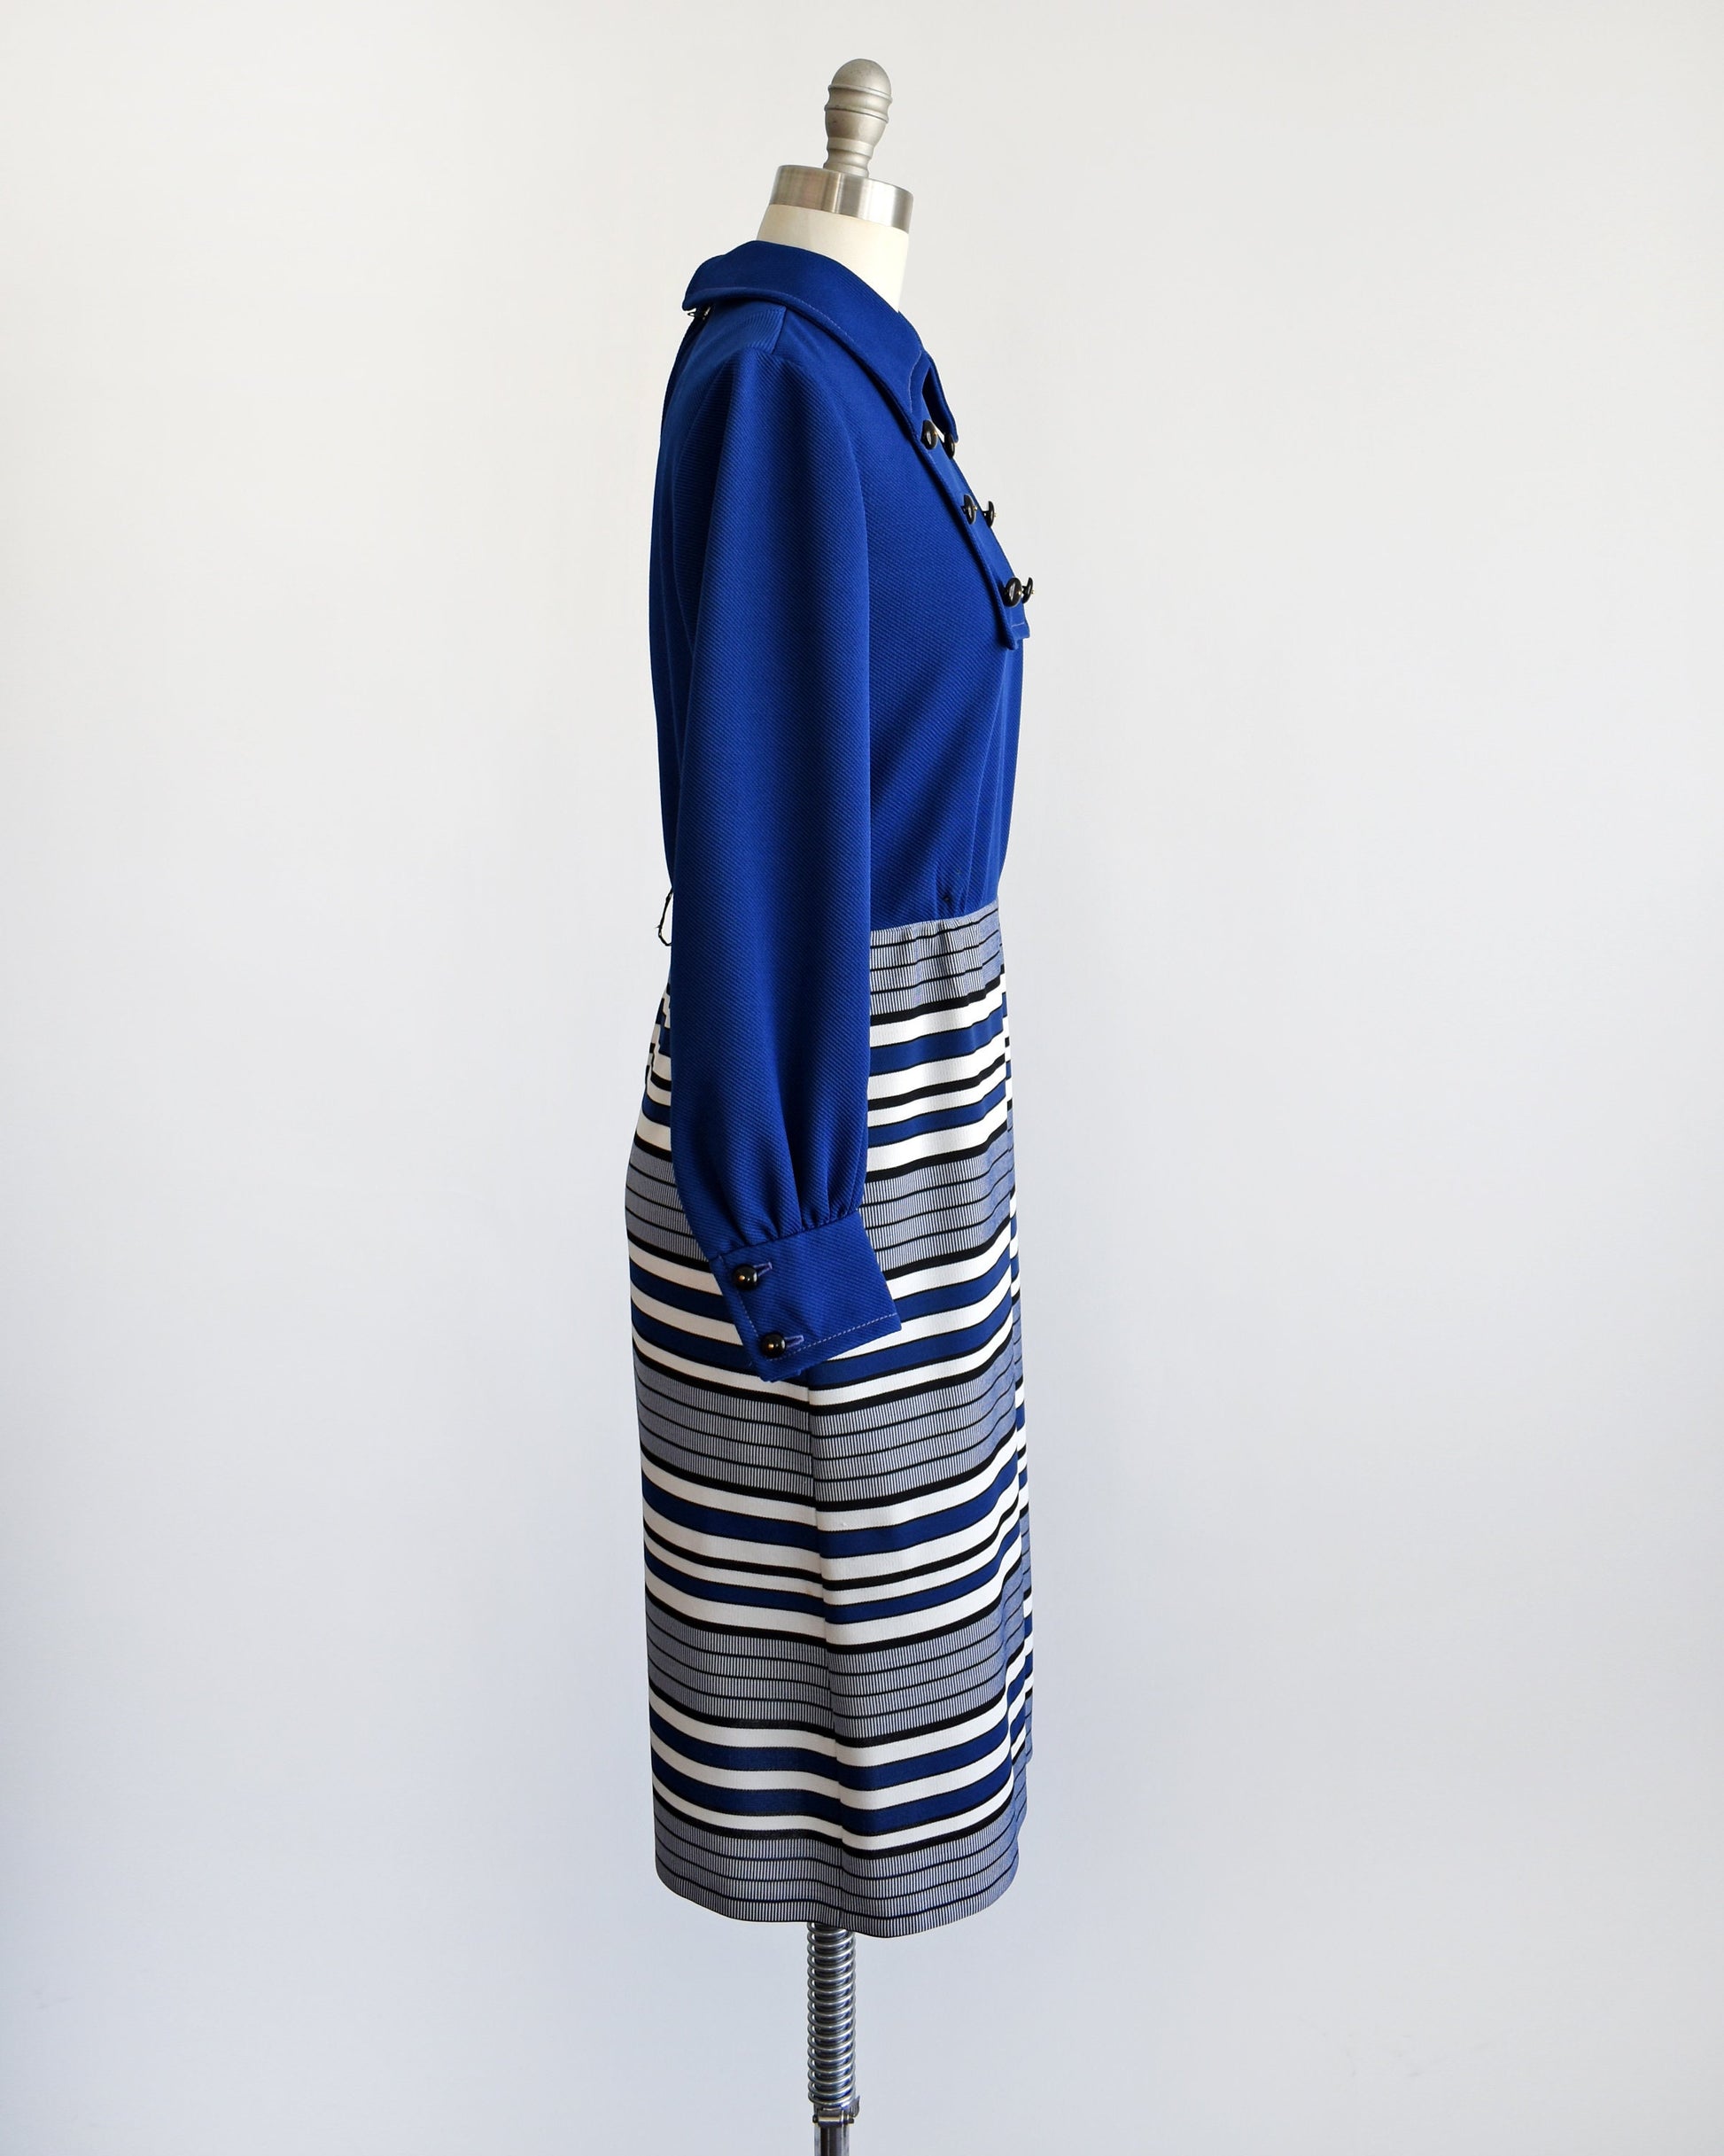 Side view of a vintage 60s mod dress on a dress form. The dress has a dark blue bodice with a pointed collar and six decorative buttons. Long sleeves. Blue, black, and white horizontal striped skirt with a large pleat on the front.